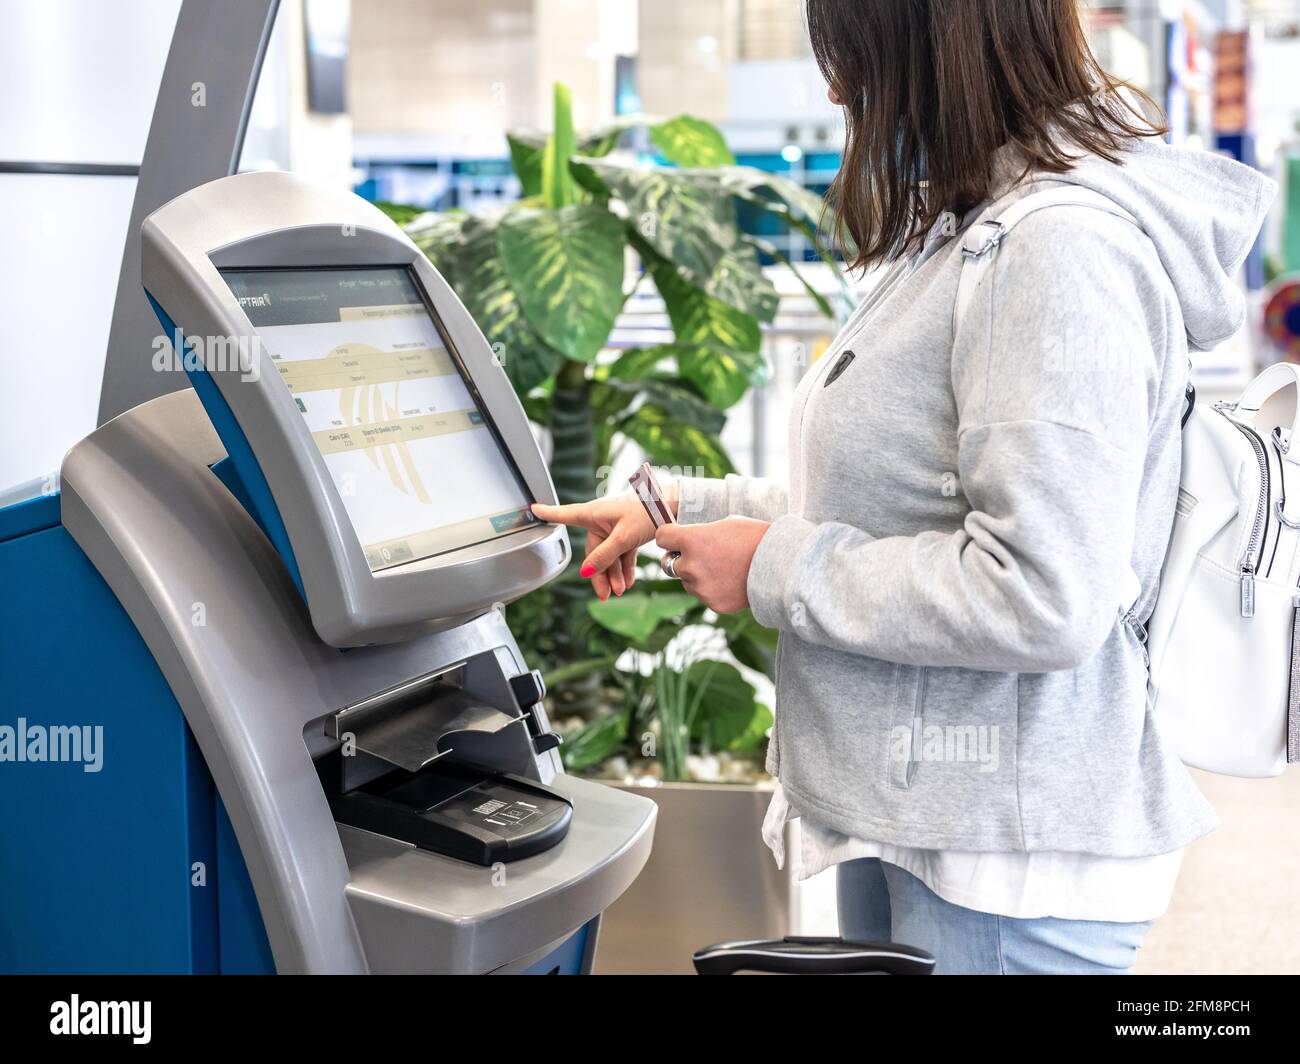 CAIRO, EGYPT - May 06, 2021: EGYPTAIR airline counter for self-check-in at Cairo airport. Woman using Self service machine at airport for check in, pr Stock Photo